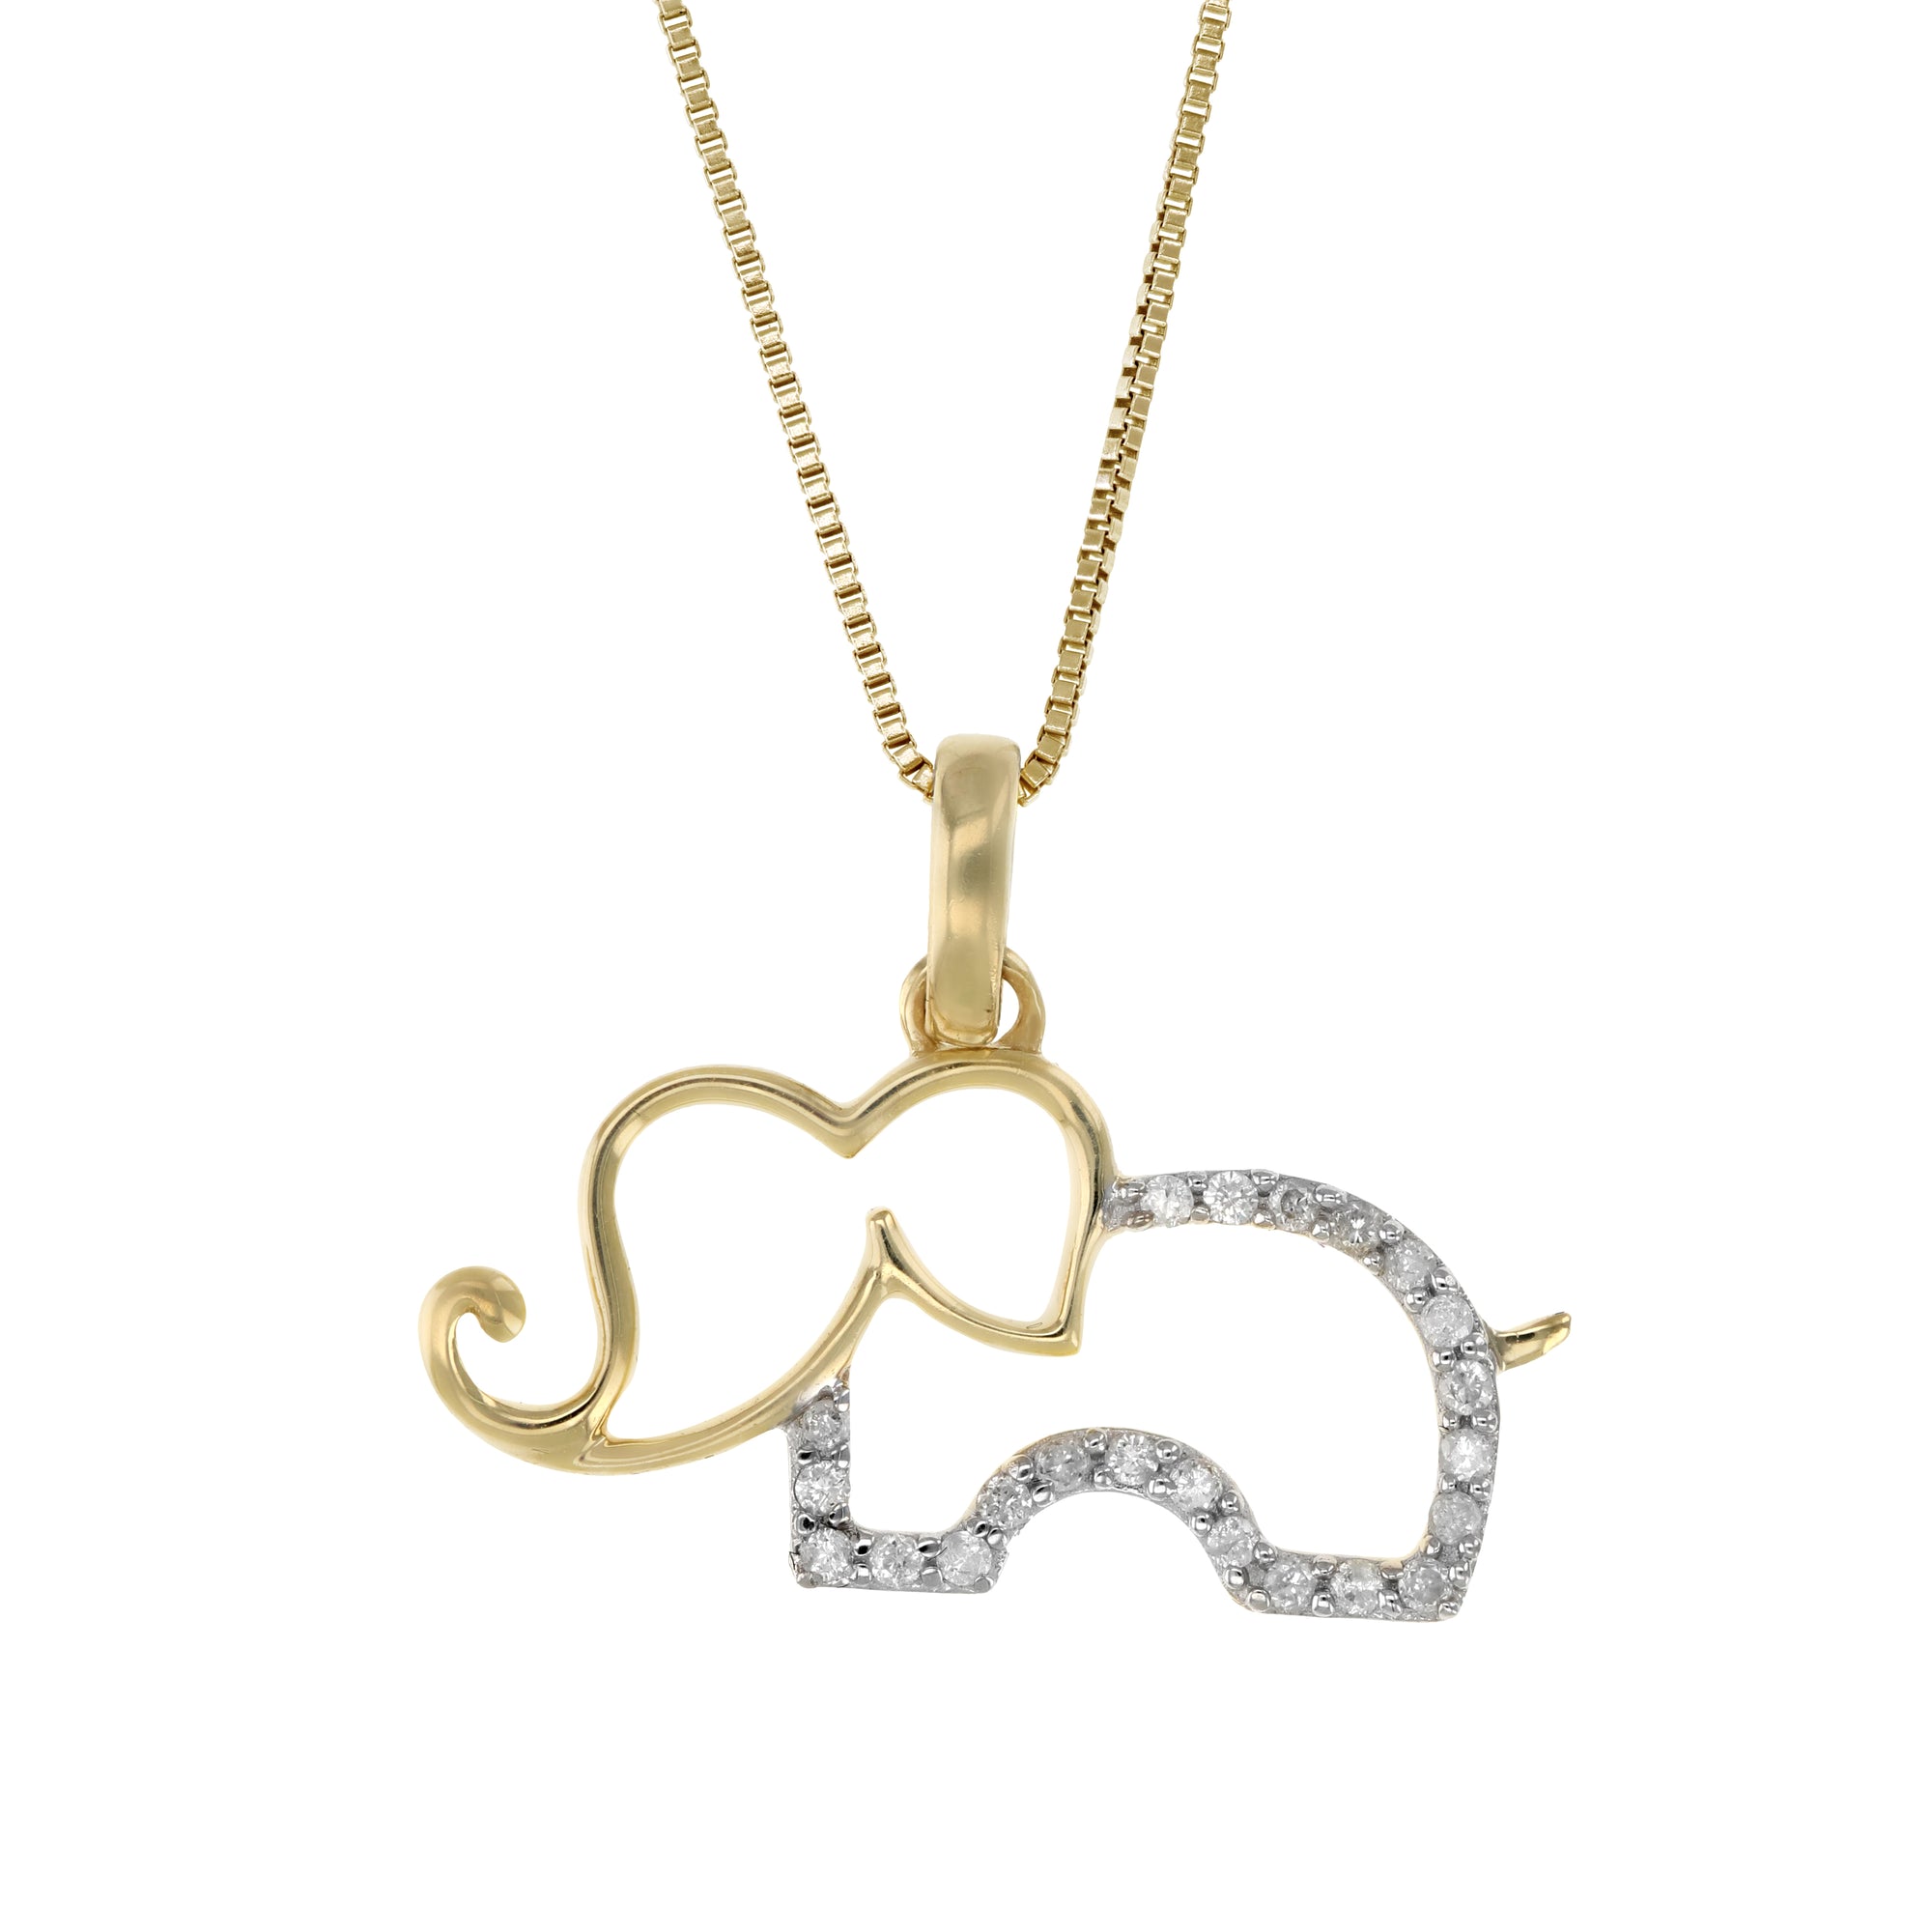 1/10 cttw Diamond Elephant Pendant Necklace 14K Yellow Gold with 18 Inch Chain